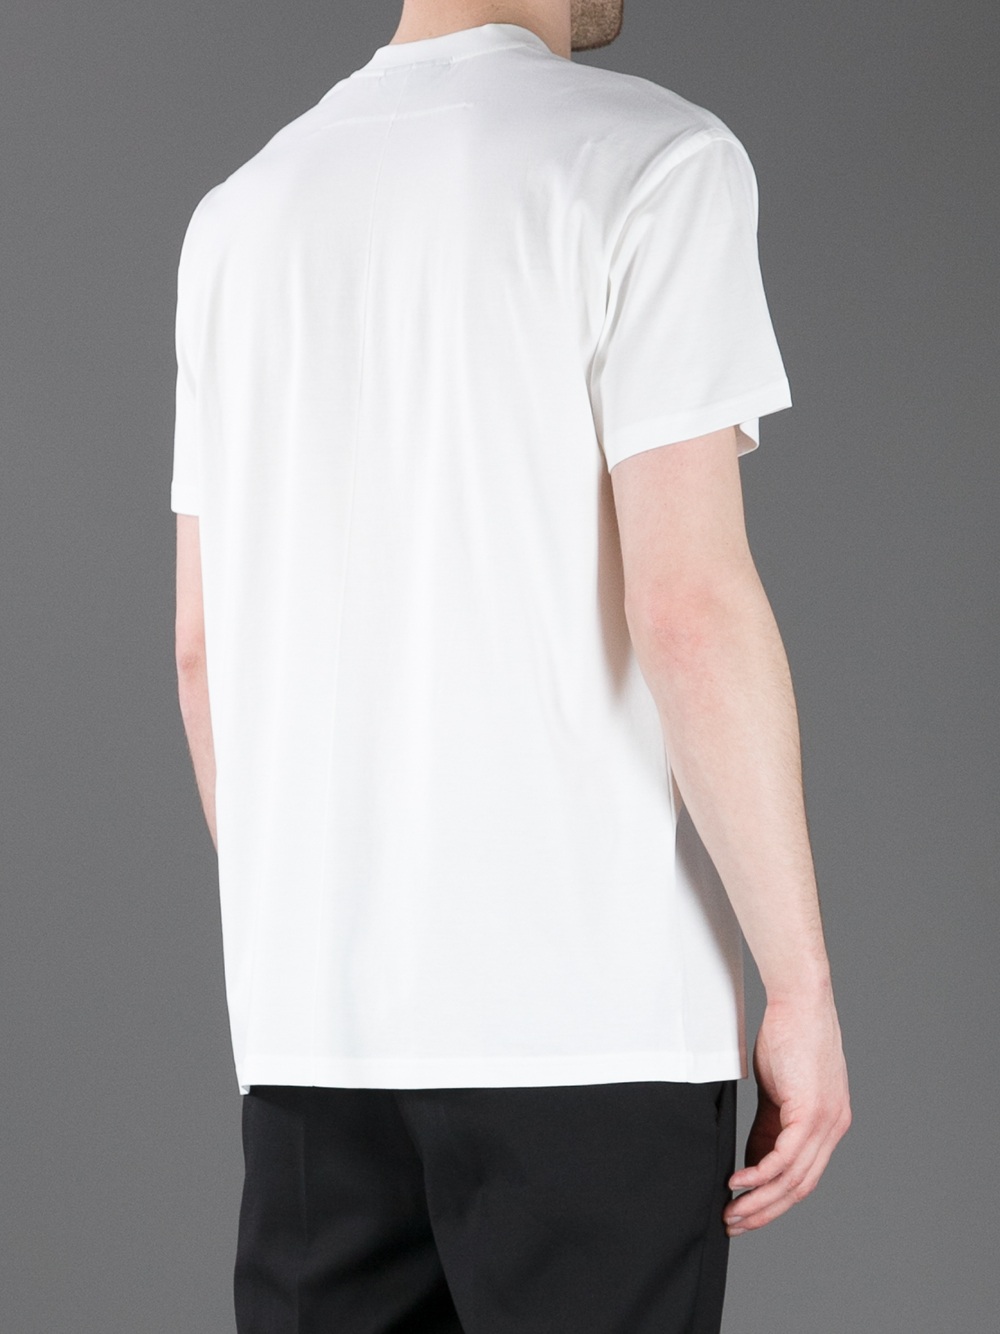 Givenchy Virgin Mary Print T-shirt in White for Men - Lyst